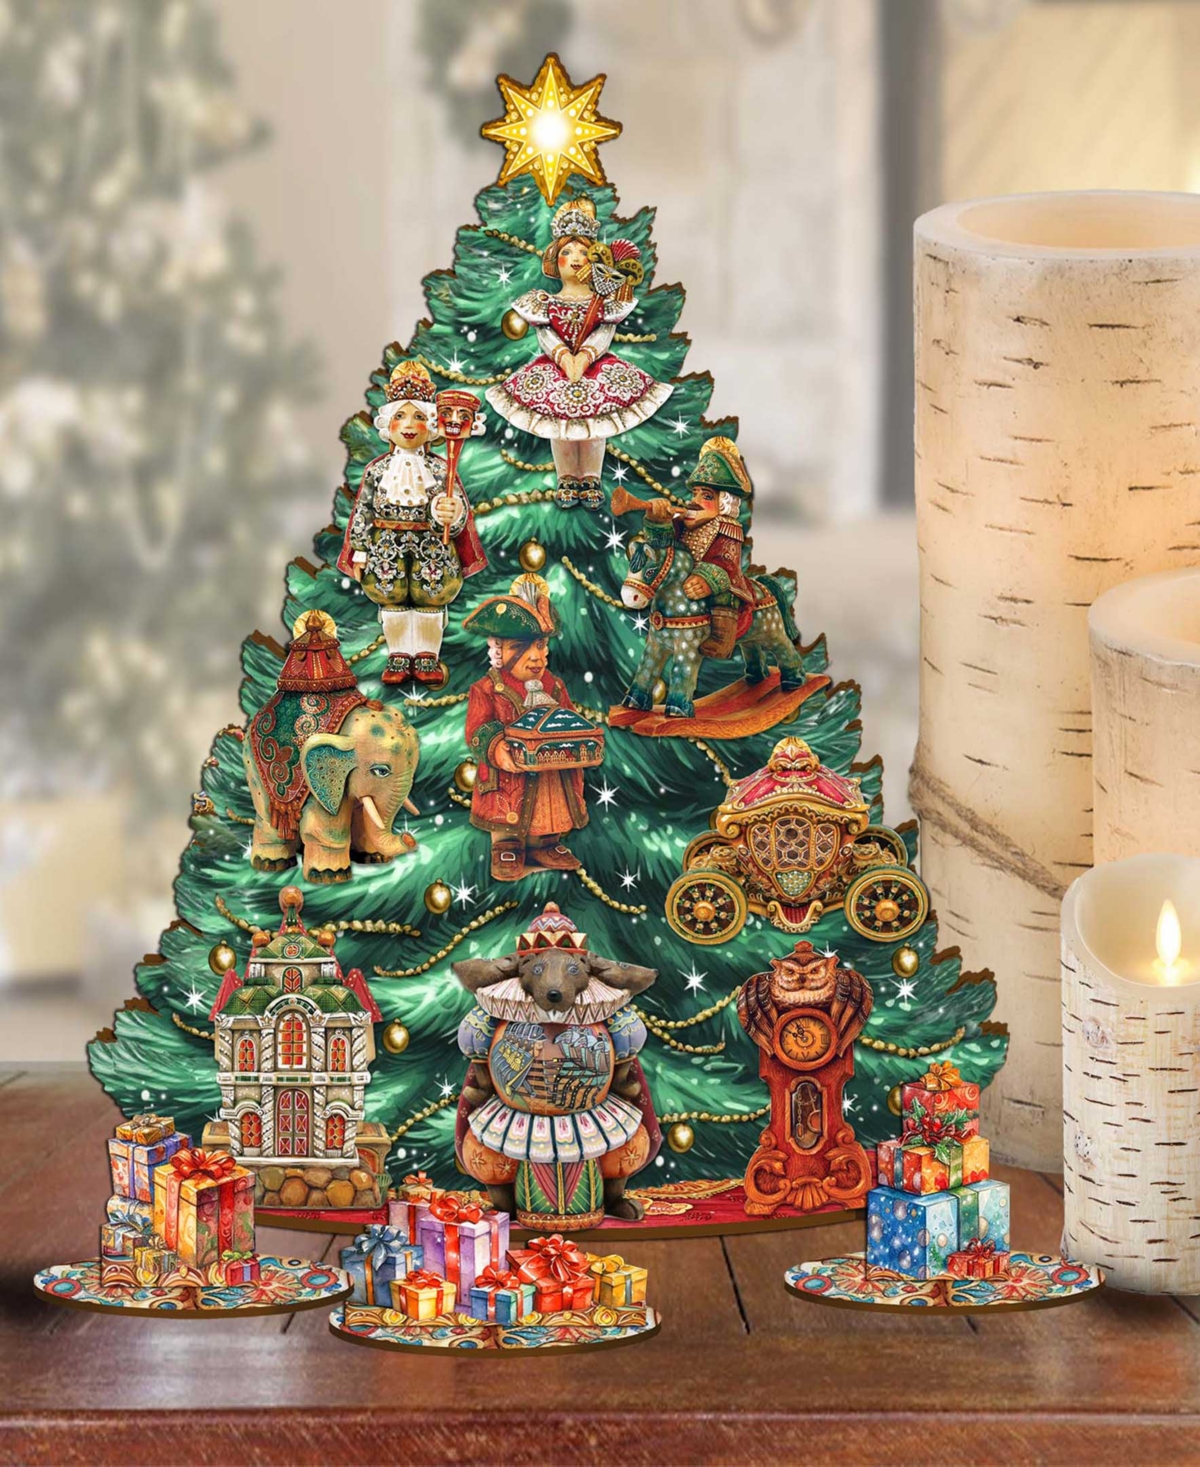 Designocracy Nutcracker Mascarade Themed Wooden Christmas Tree With Ornaments Set Of 13 G. Debrekht In Multi Color